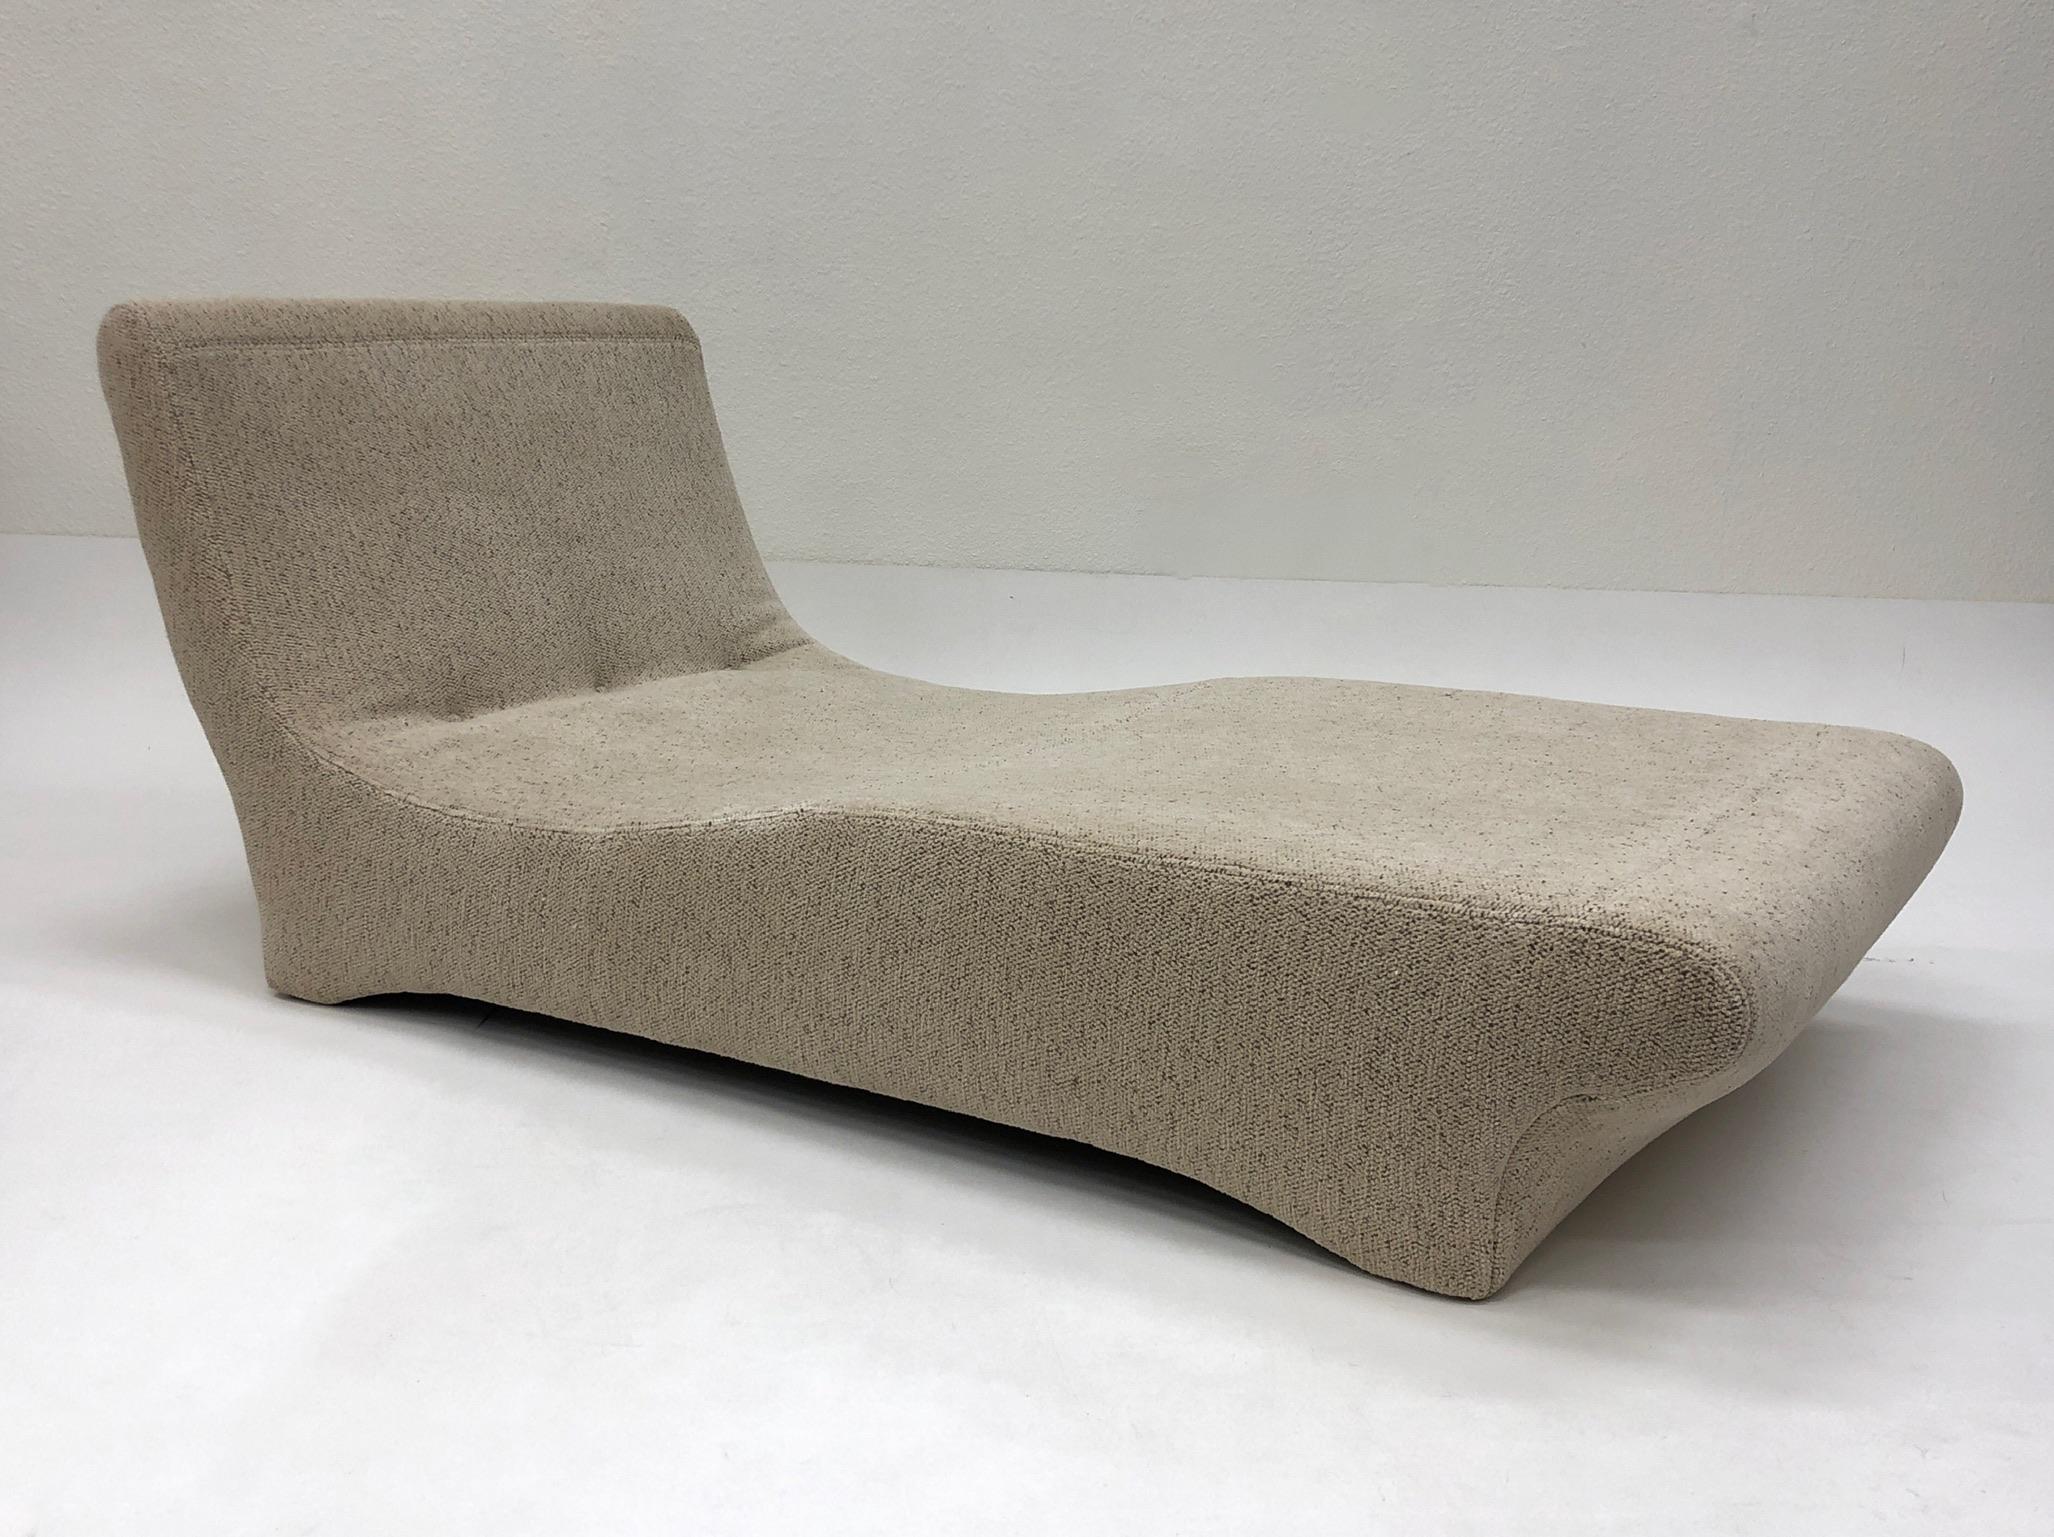 A glamorous sculptural chaise design by Preview in the 1990s.
The chaise has been newly recovered in soft off-white chenille fabric with some light brown threads (see detail photos).
Dimension: 64” deep, 32” wide, 32” high, 20” seat.